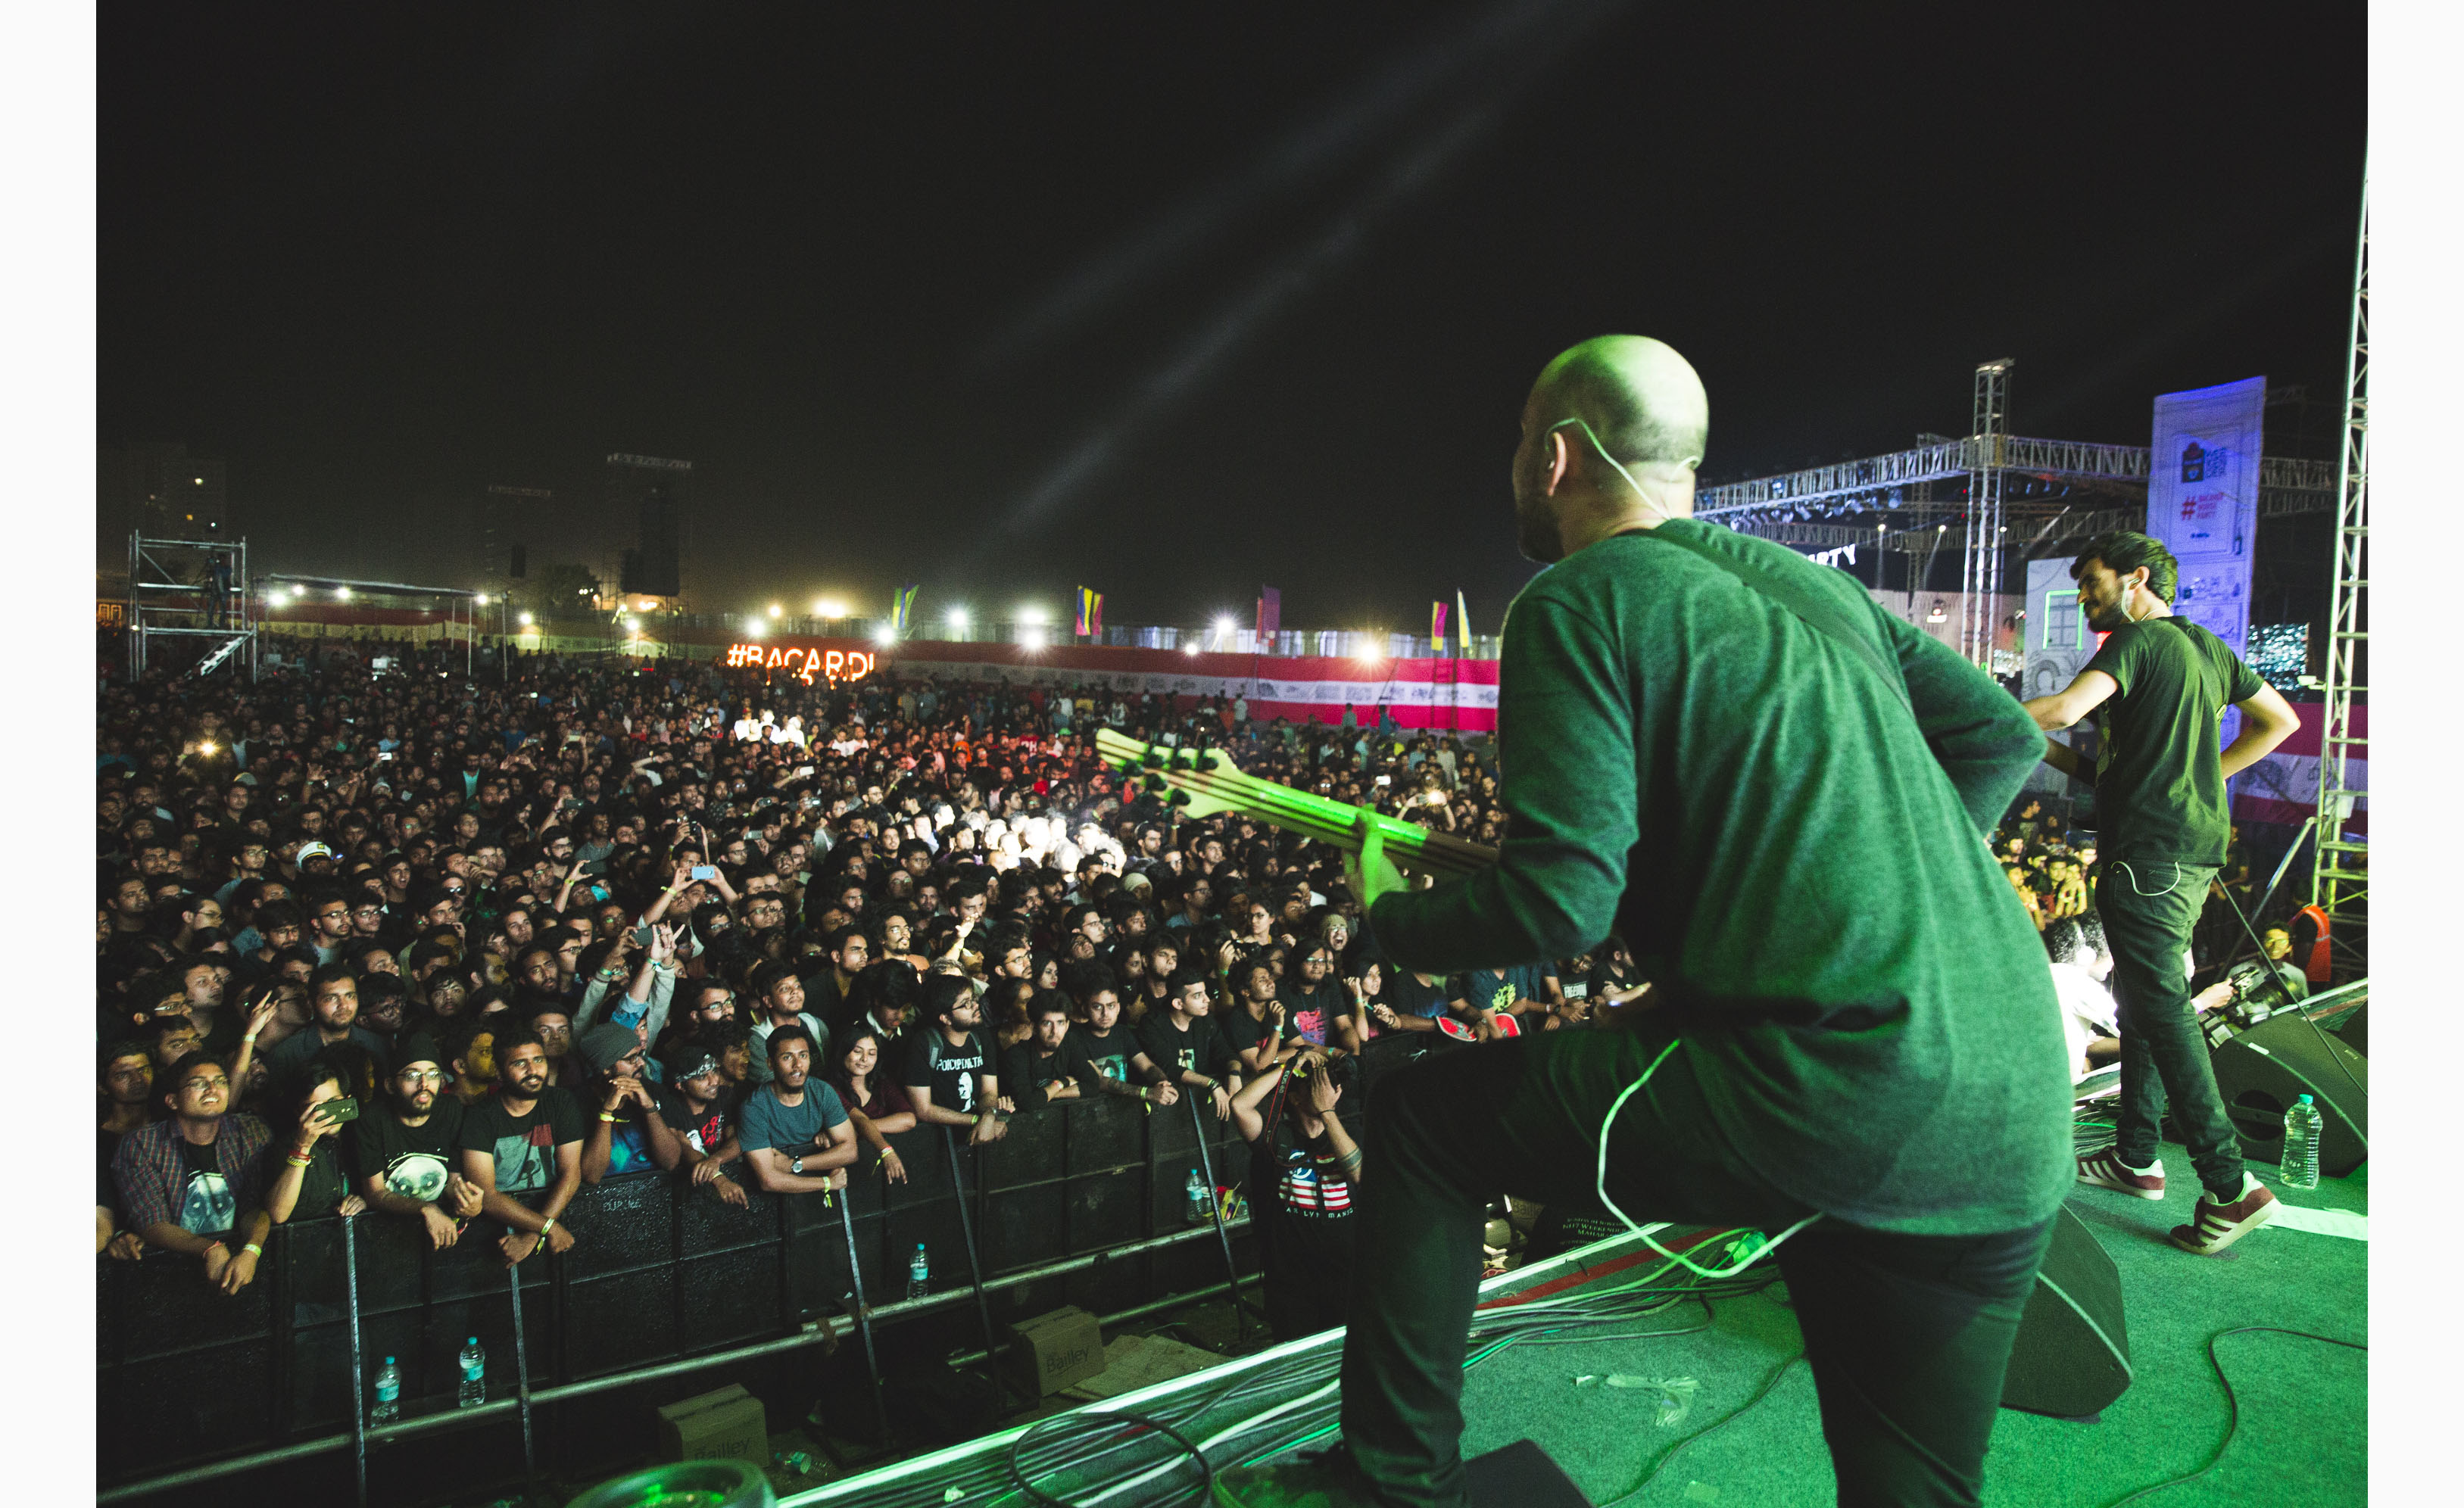  Skyharbour performance on Day 2 of Bacardi NH7 Weekender Pune. Photo Credit - Parizad D